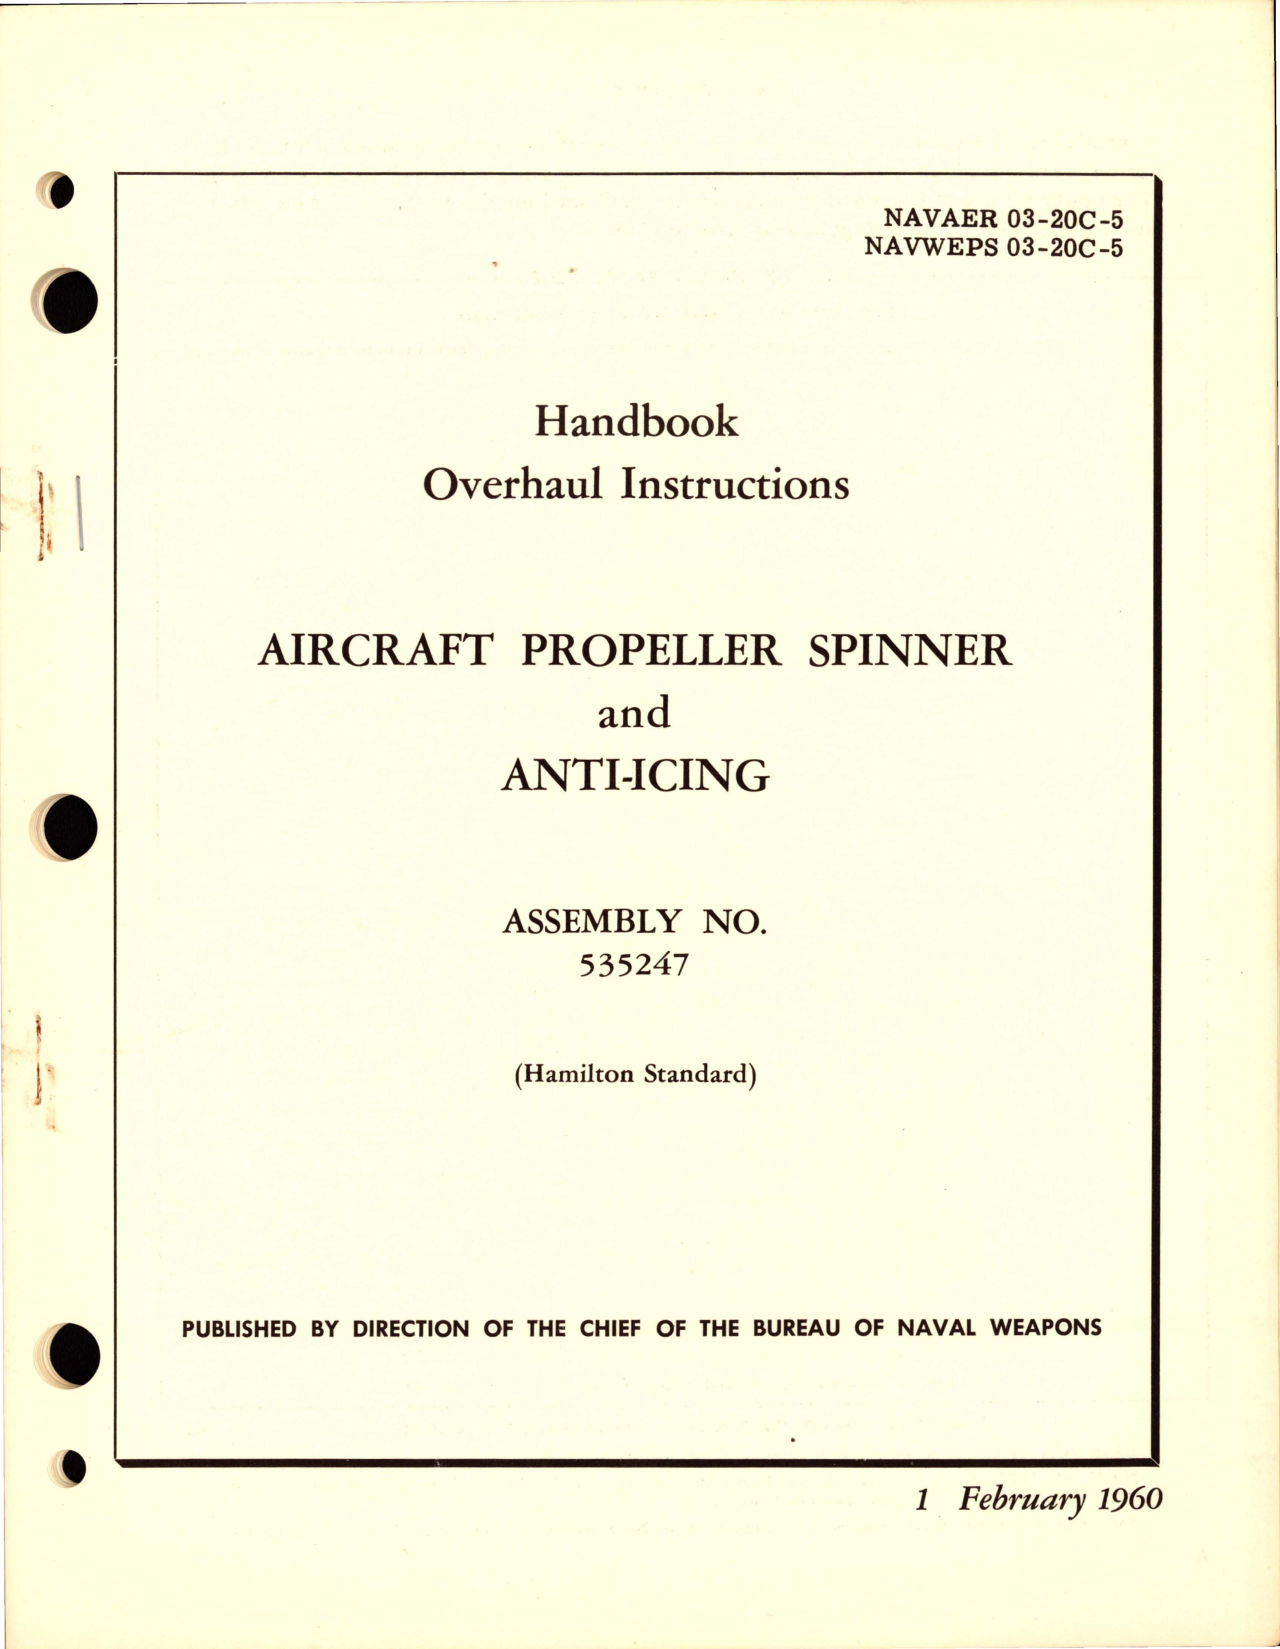 Sample page 1 from AirCorps Library document: Overhaul Instructions for Aircraft Propeller Spinner and Anti-Icing - Assembly No. 535247 